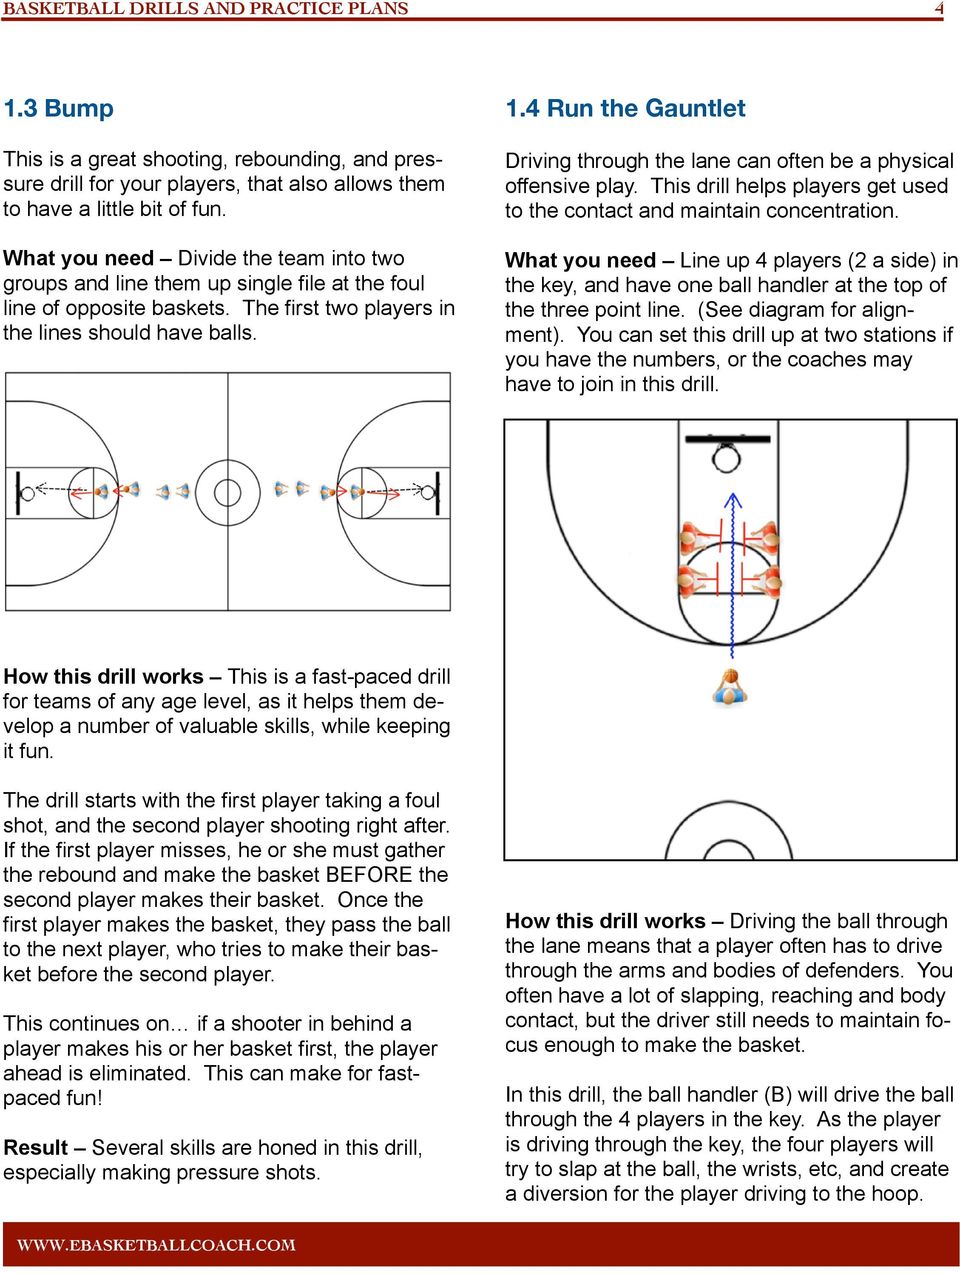 4 Run the Gauntlet Driving through the lane can often be a physical offensive play. This drill helps players get used to the contact and maintain concentration.